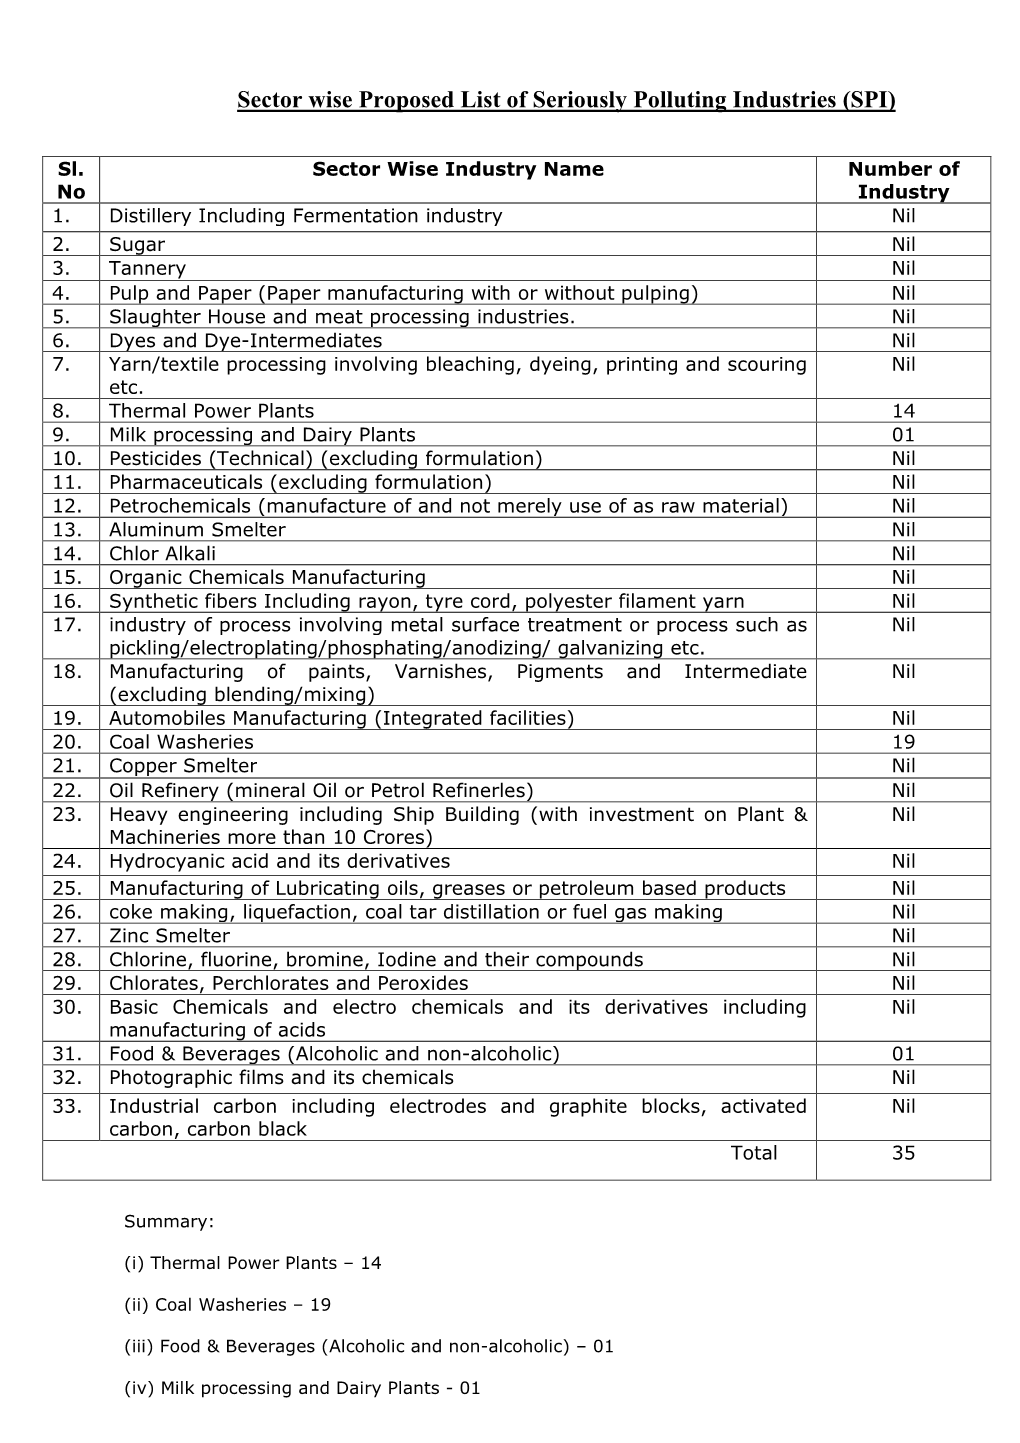 Sector Wise Proposed List of Seriously Polluting Industries SPI Final 2